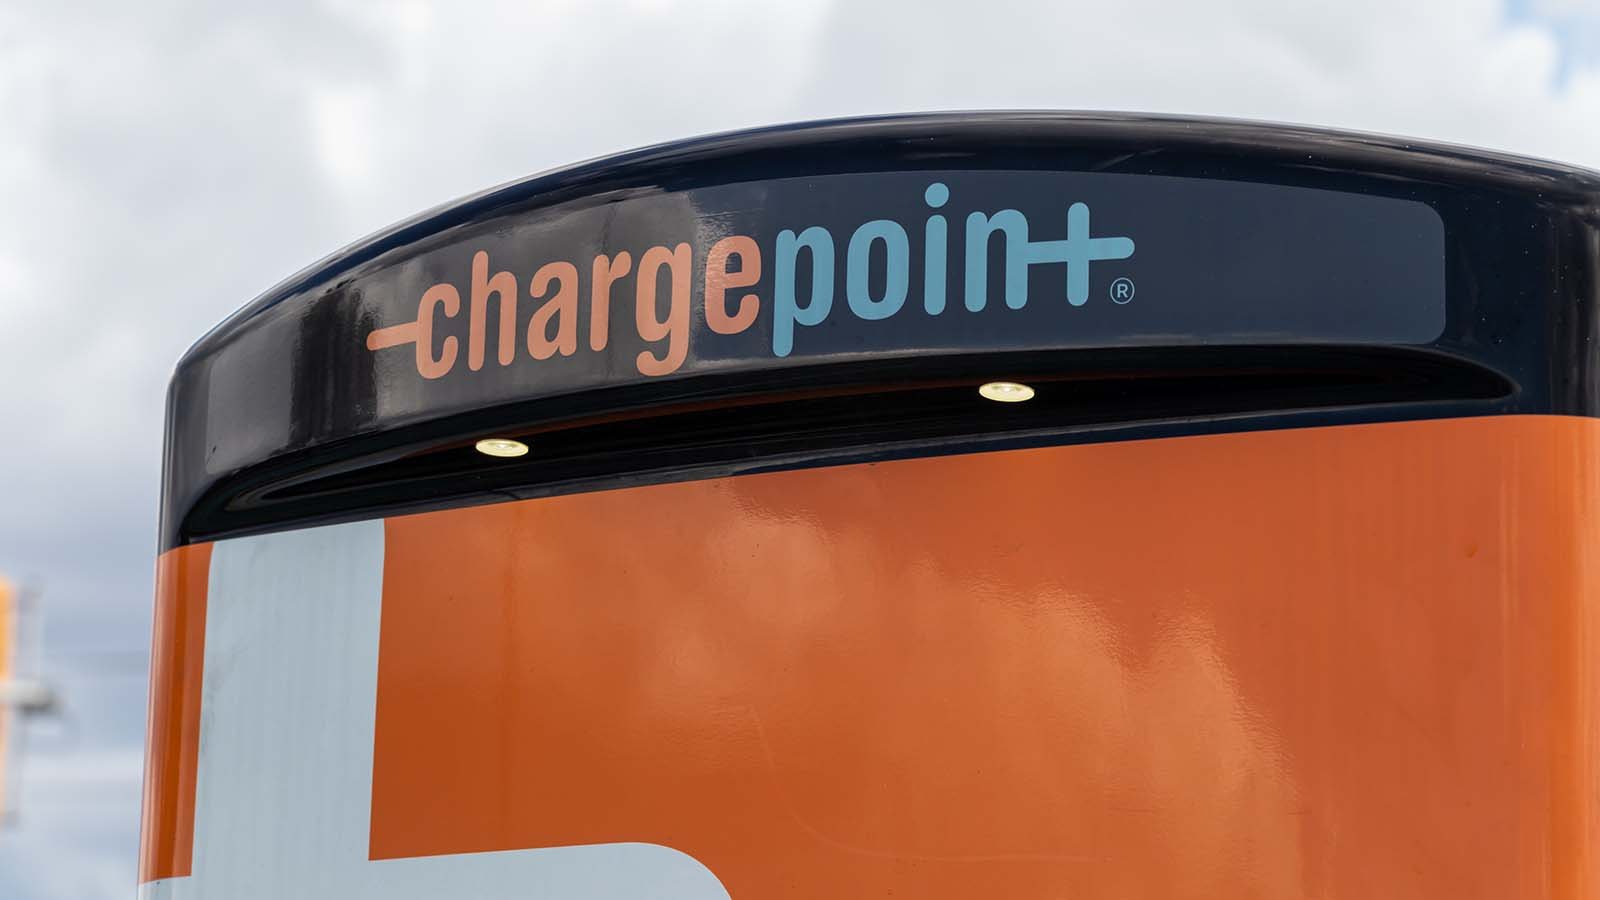 ChargePoint Forecast: What Will CHPT Stock Be Worth in 5 Years?